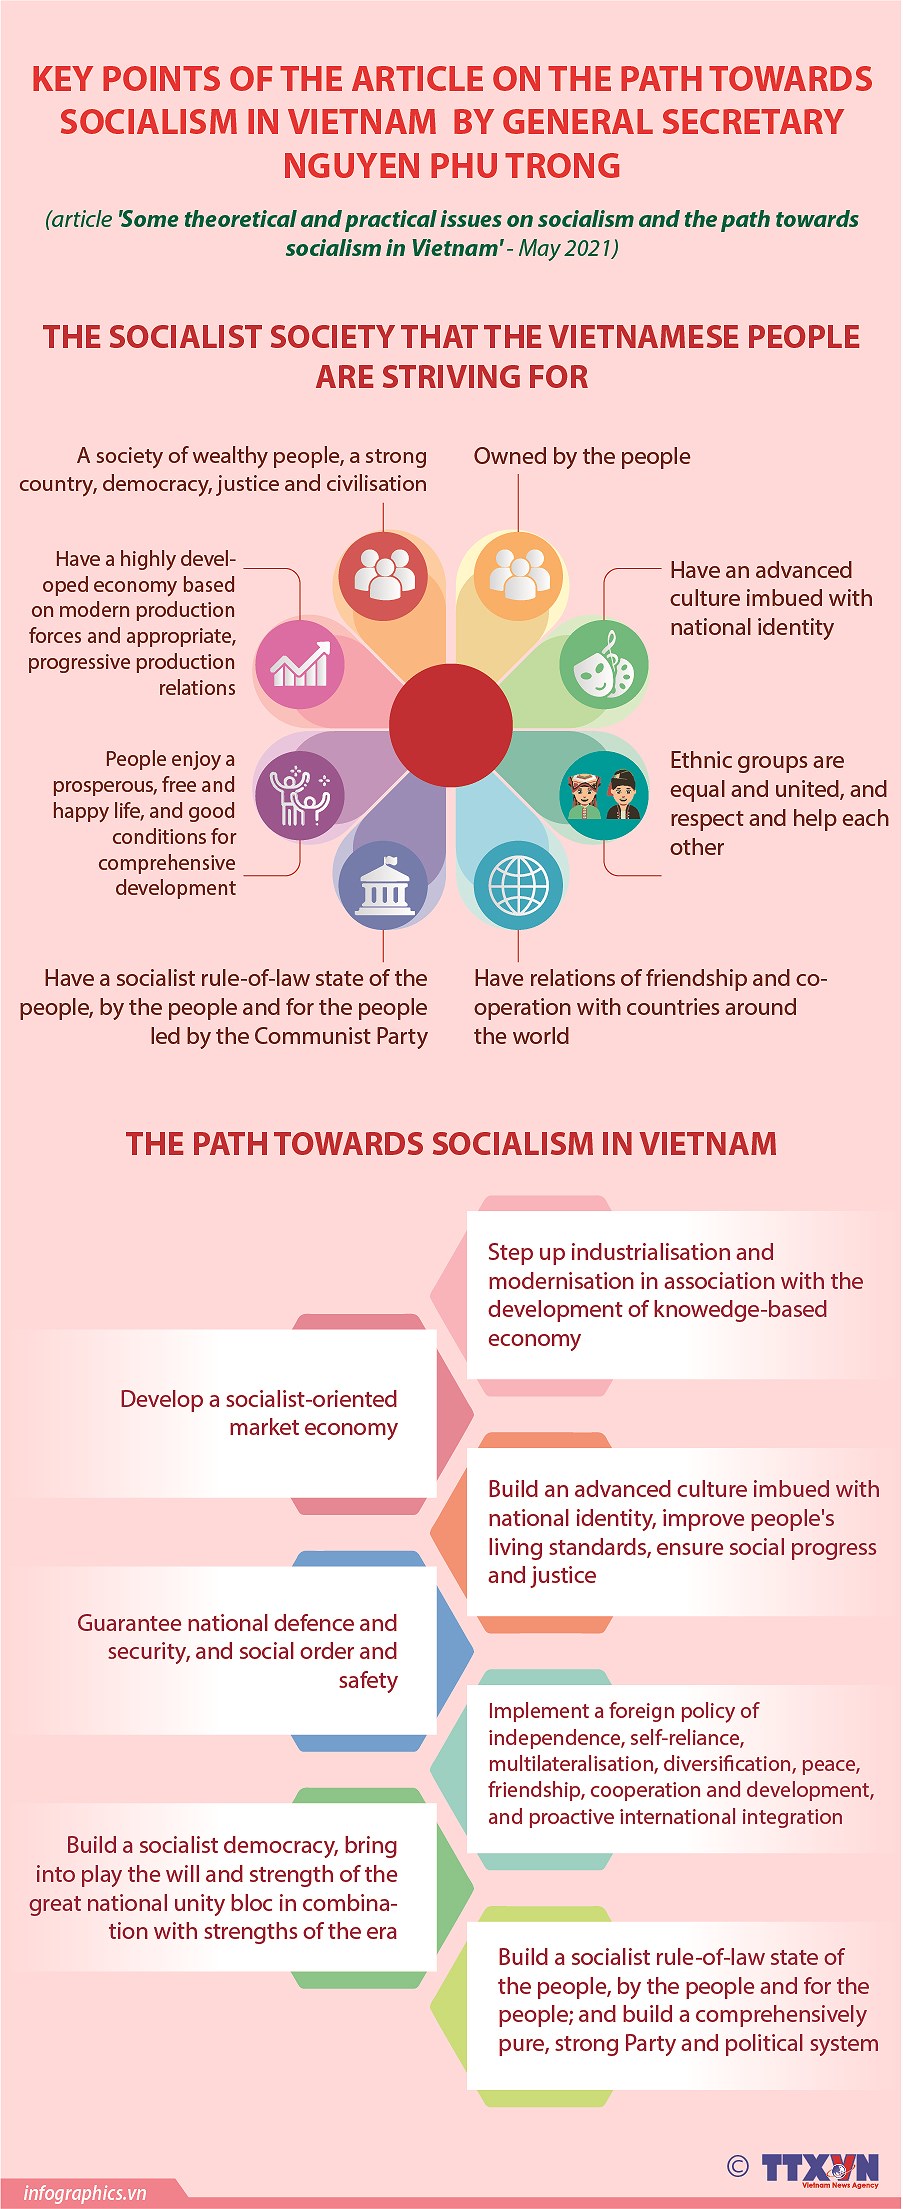 Theoretical and practical issues on socialism and path towards socialism in Vietnam hinh anh 1